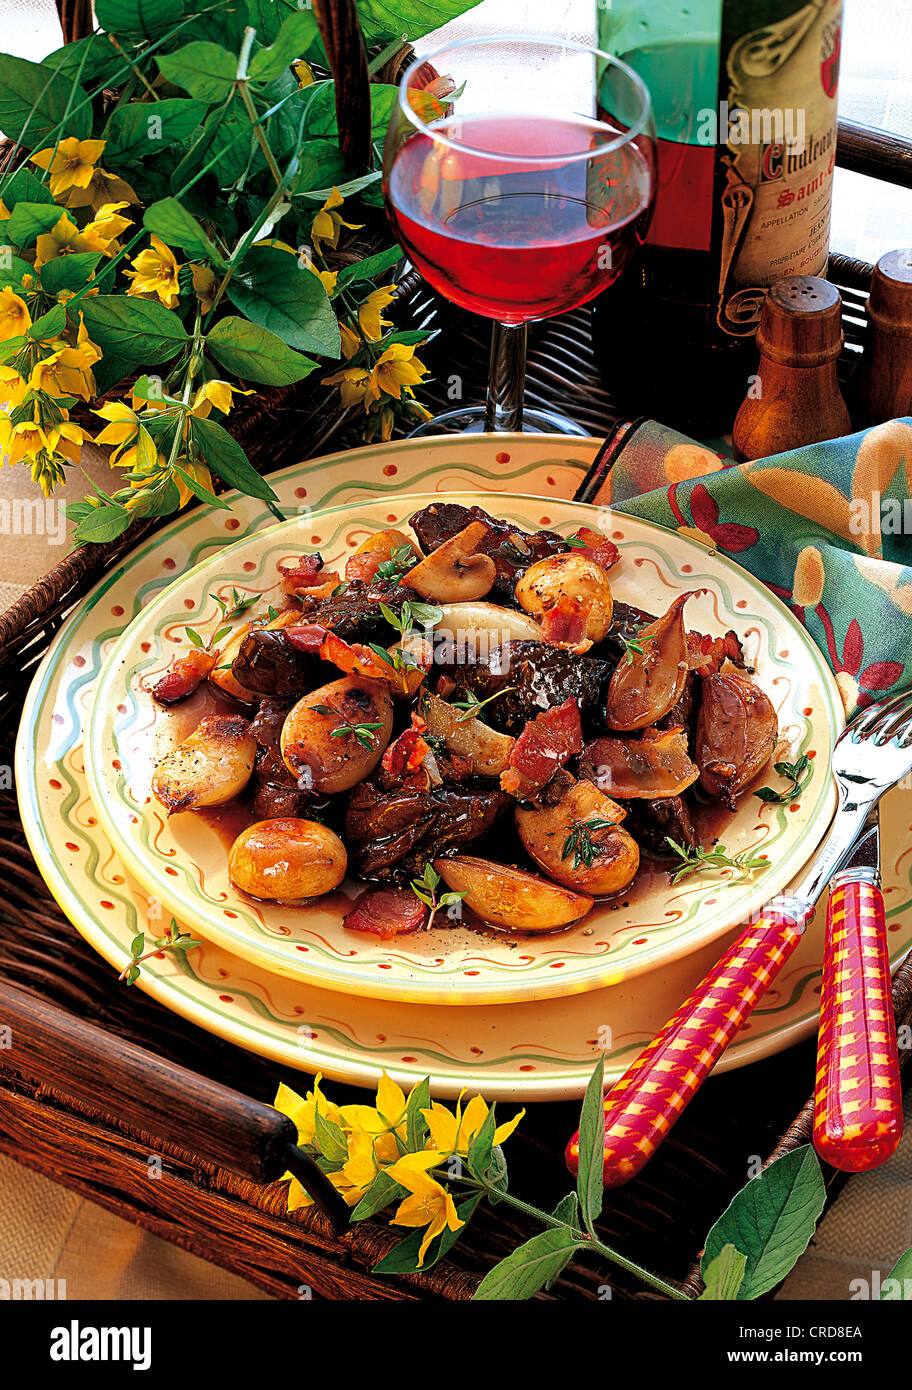 Boeuf Bourguignon, braised beef with herbs, bacon, shallots, garlic and strong Burgundy wine, France. Stock Photo